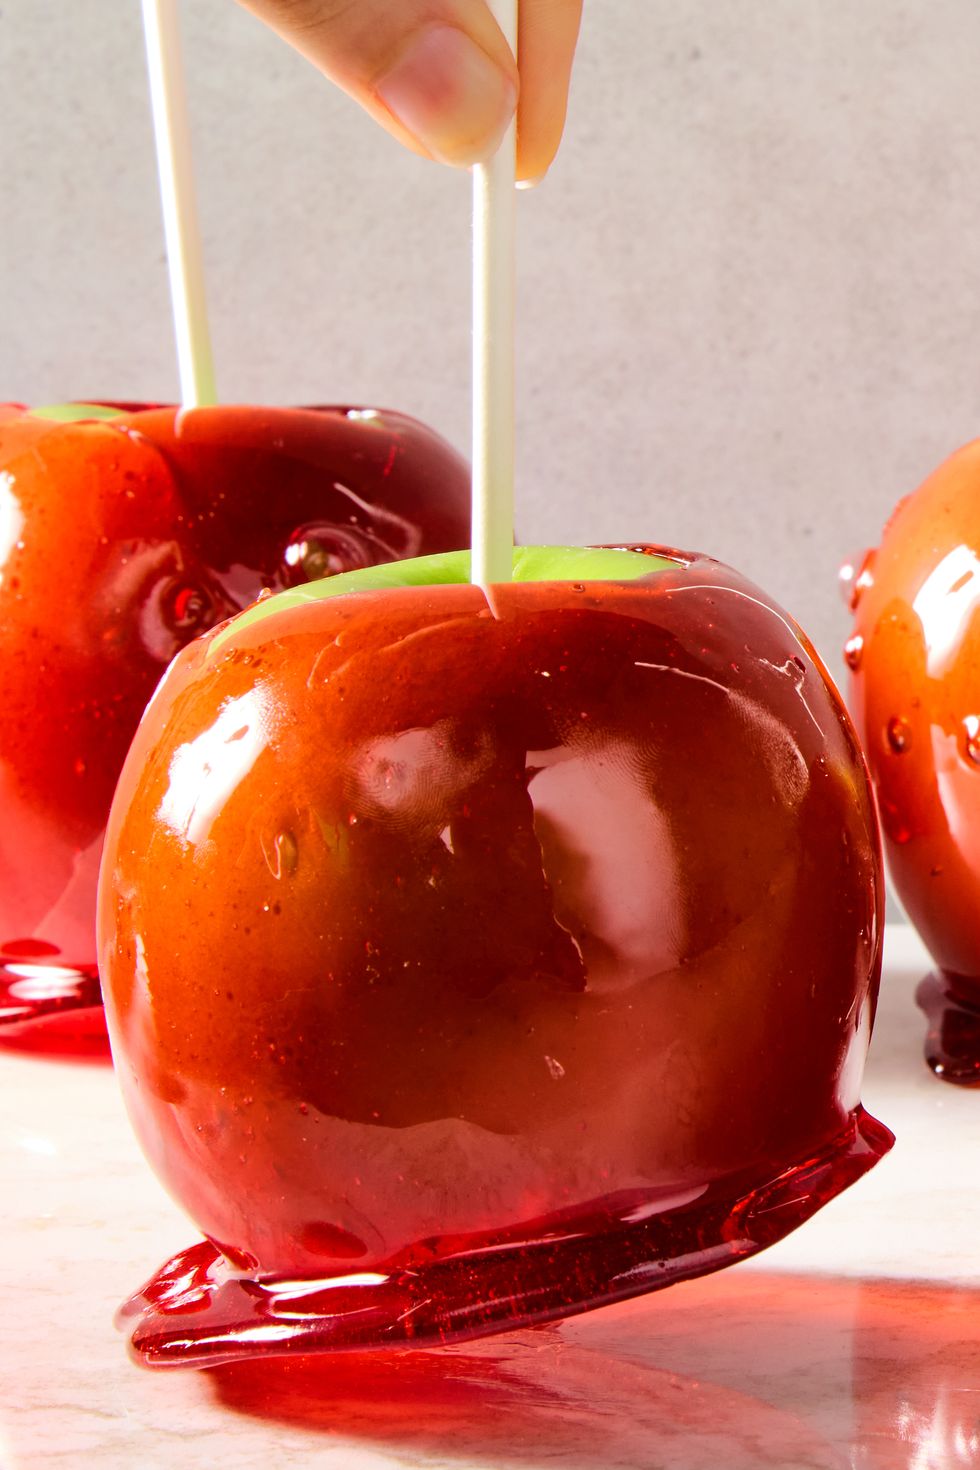 green apples with a red candy coating and a popsicle stick